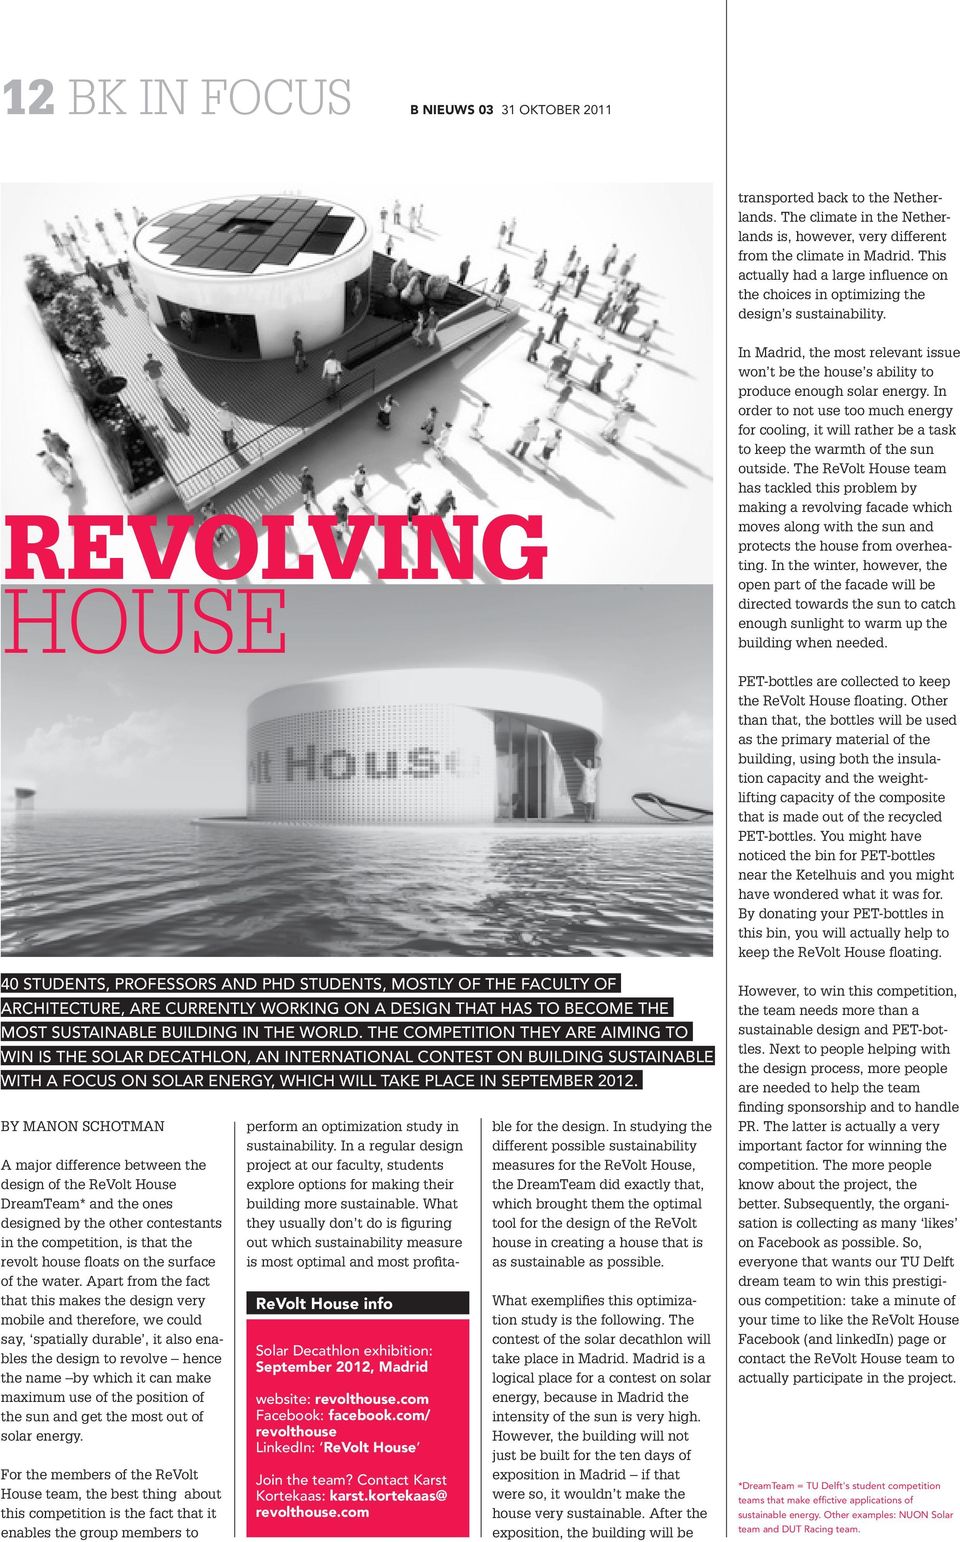 REVOLVING HOUSE In Madrid, the most relevant issue won t be the house s ability to produce enough solar energy.